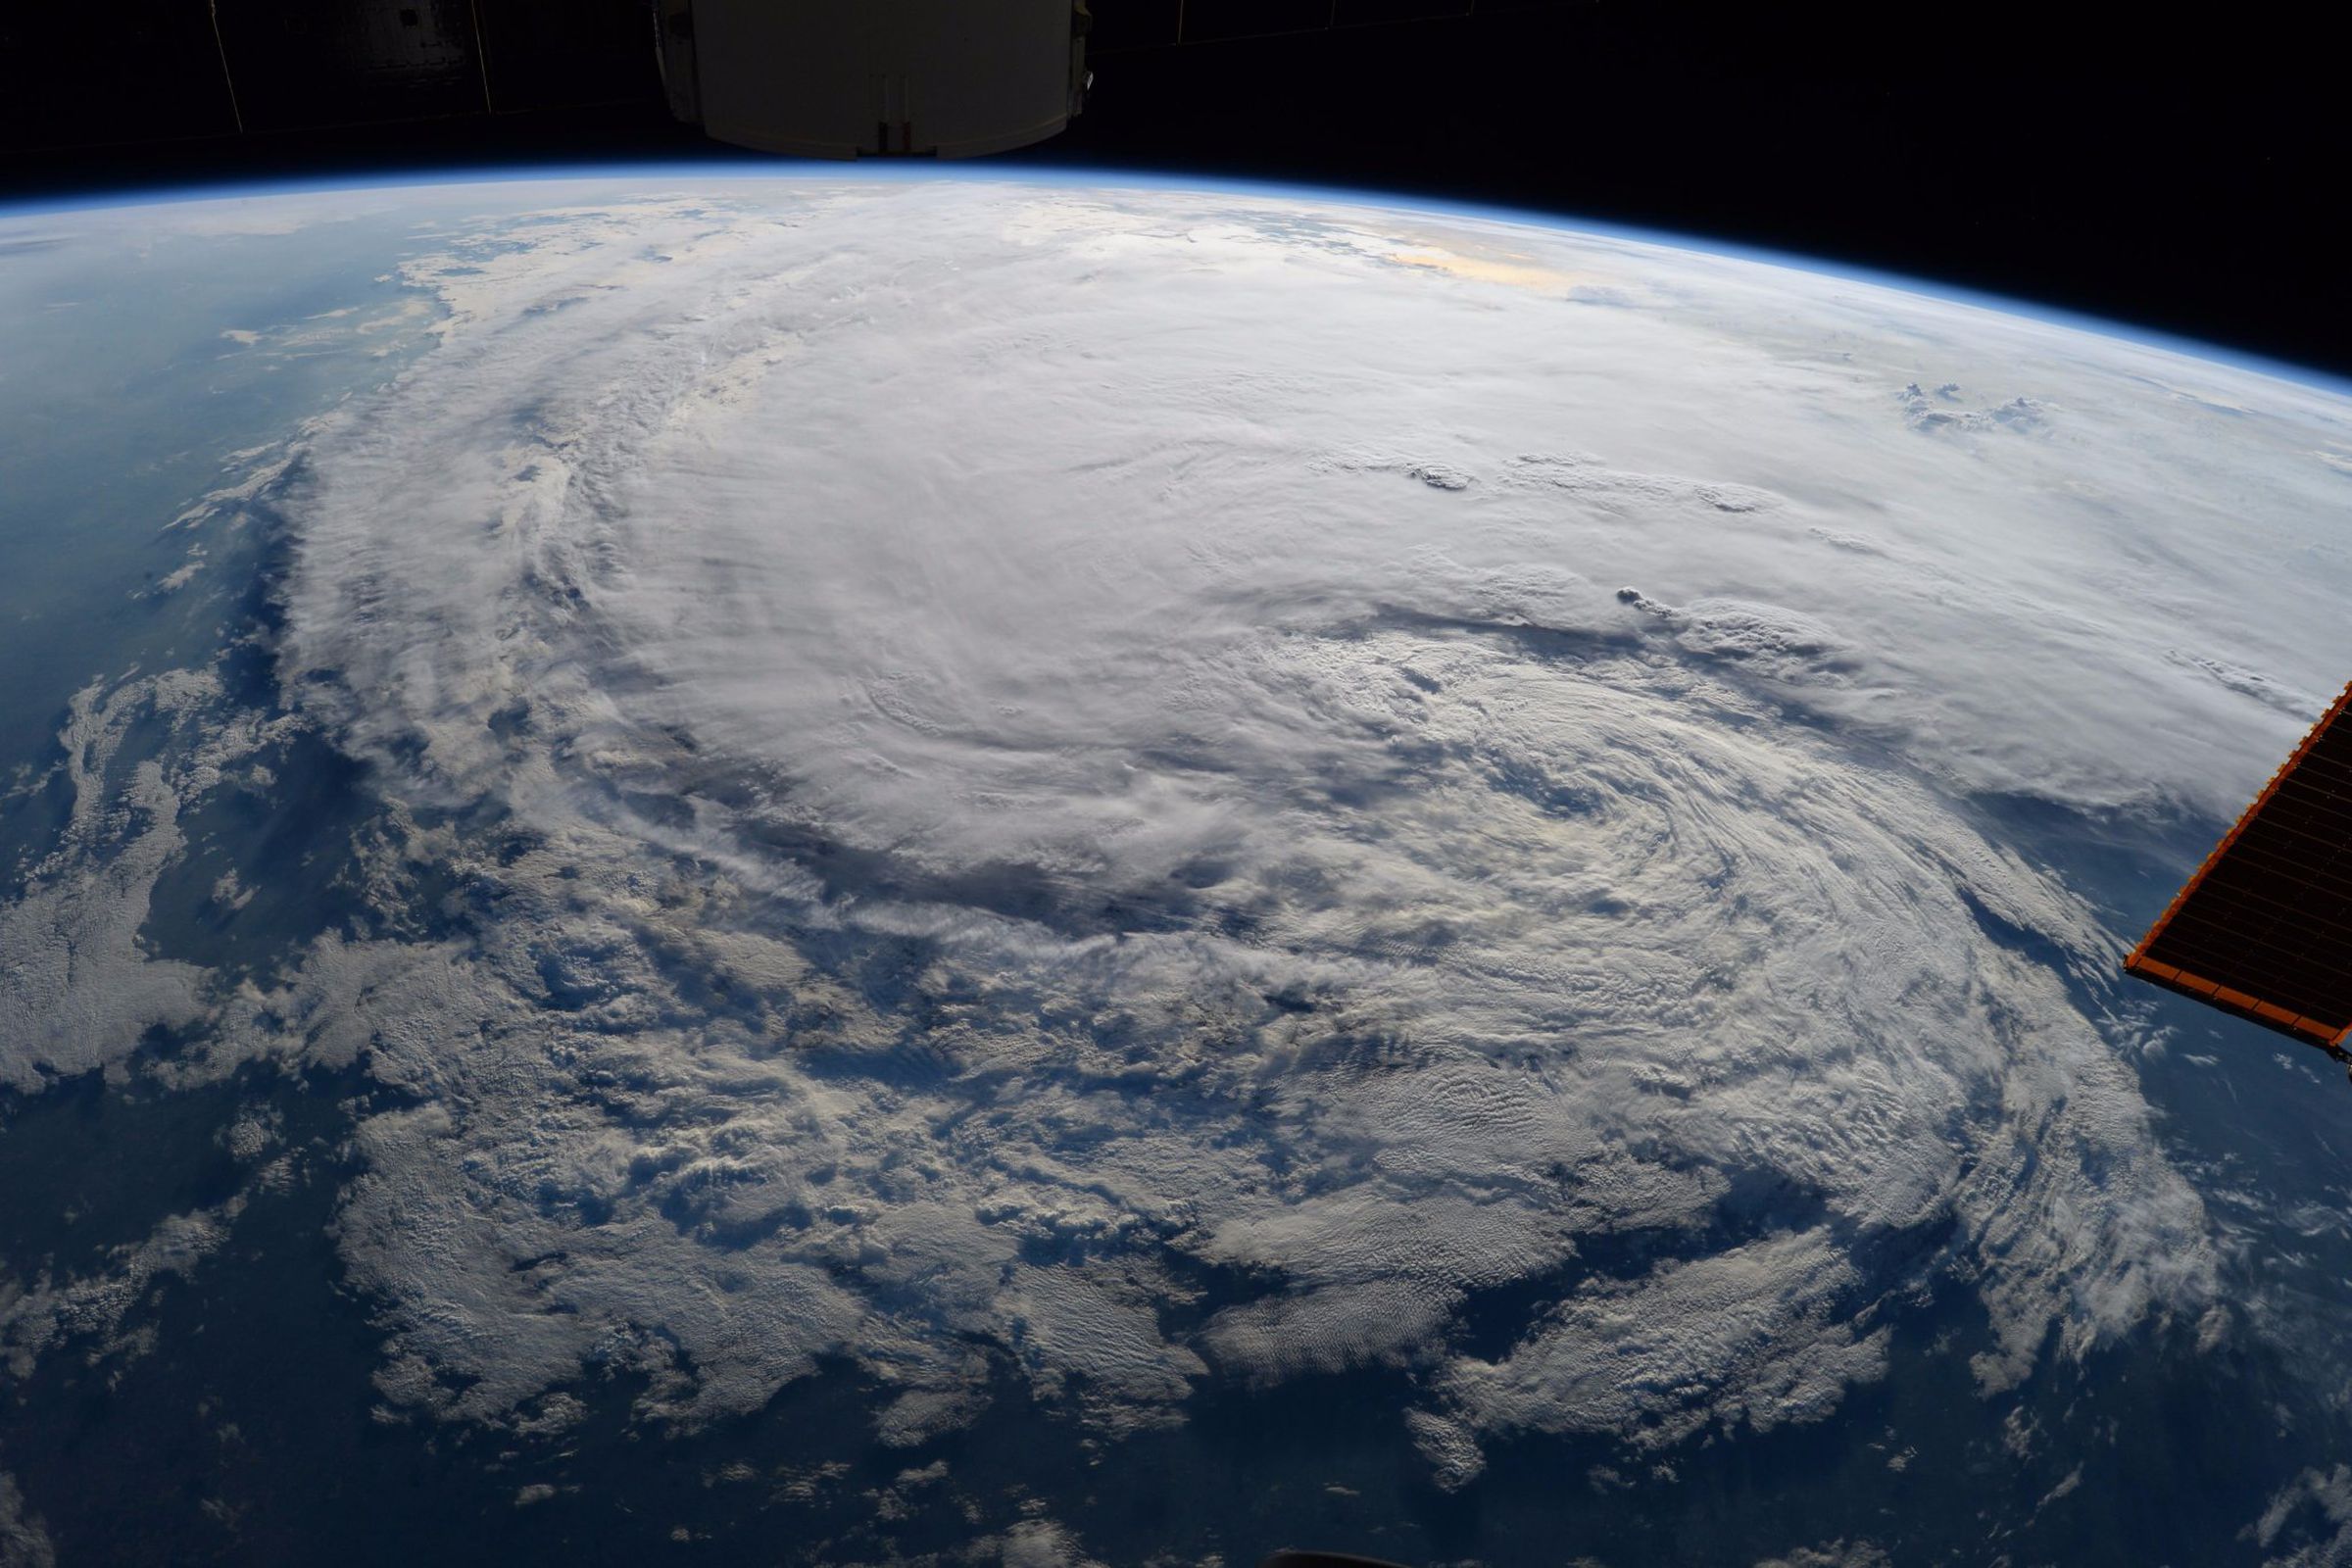 Hurricane Harvey from the International Space Station, August 28th, 2017.